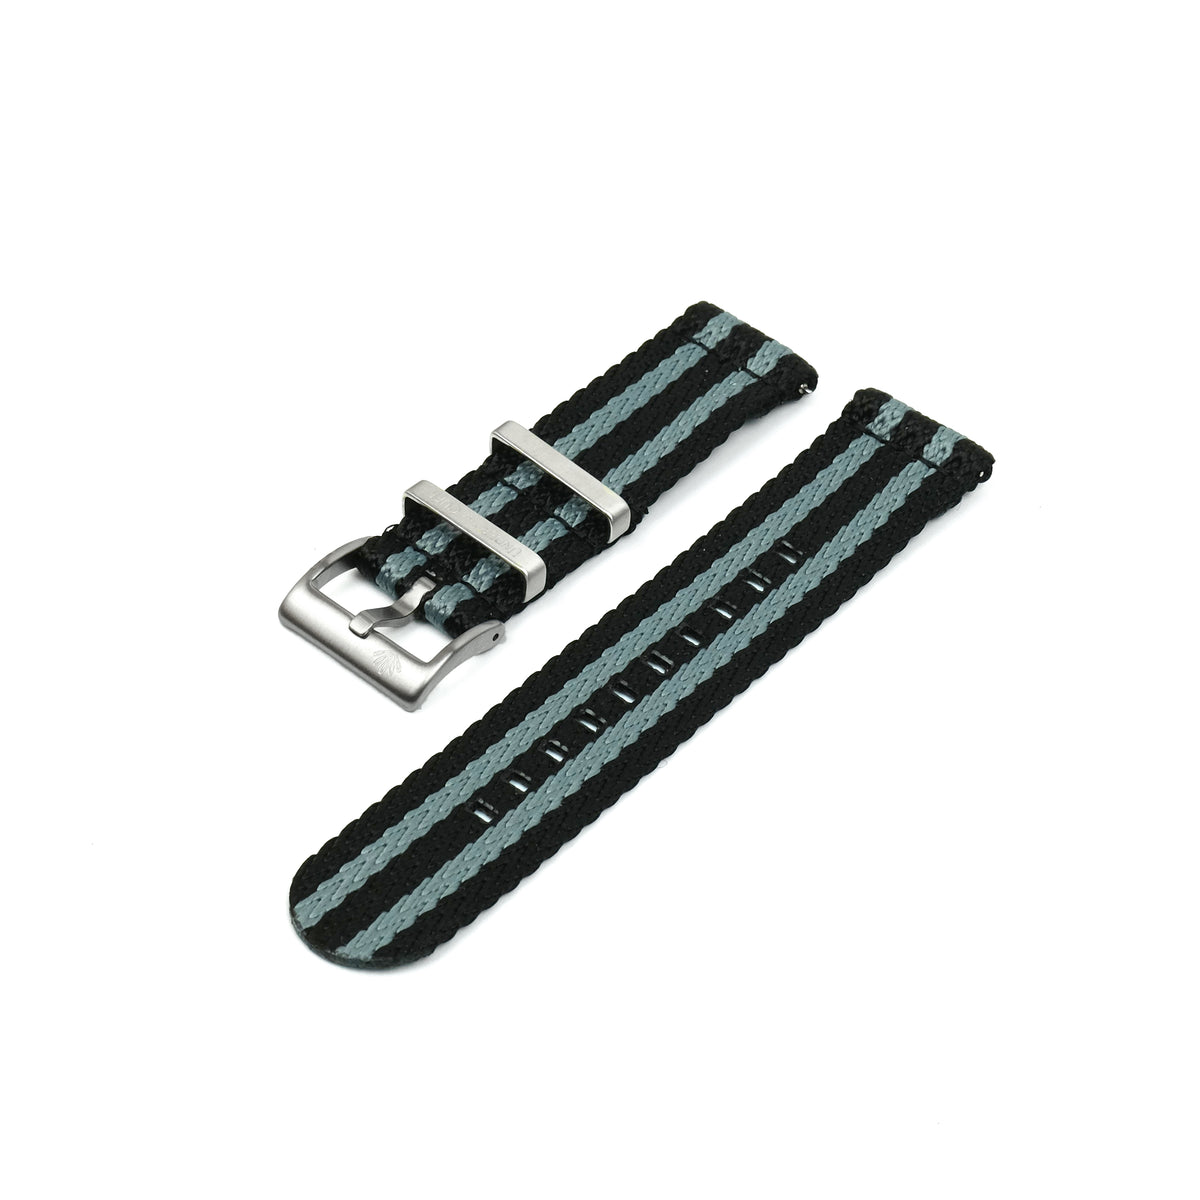 Apex® and Apex Plus Regular Duty Steel Strapping